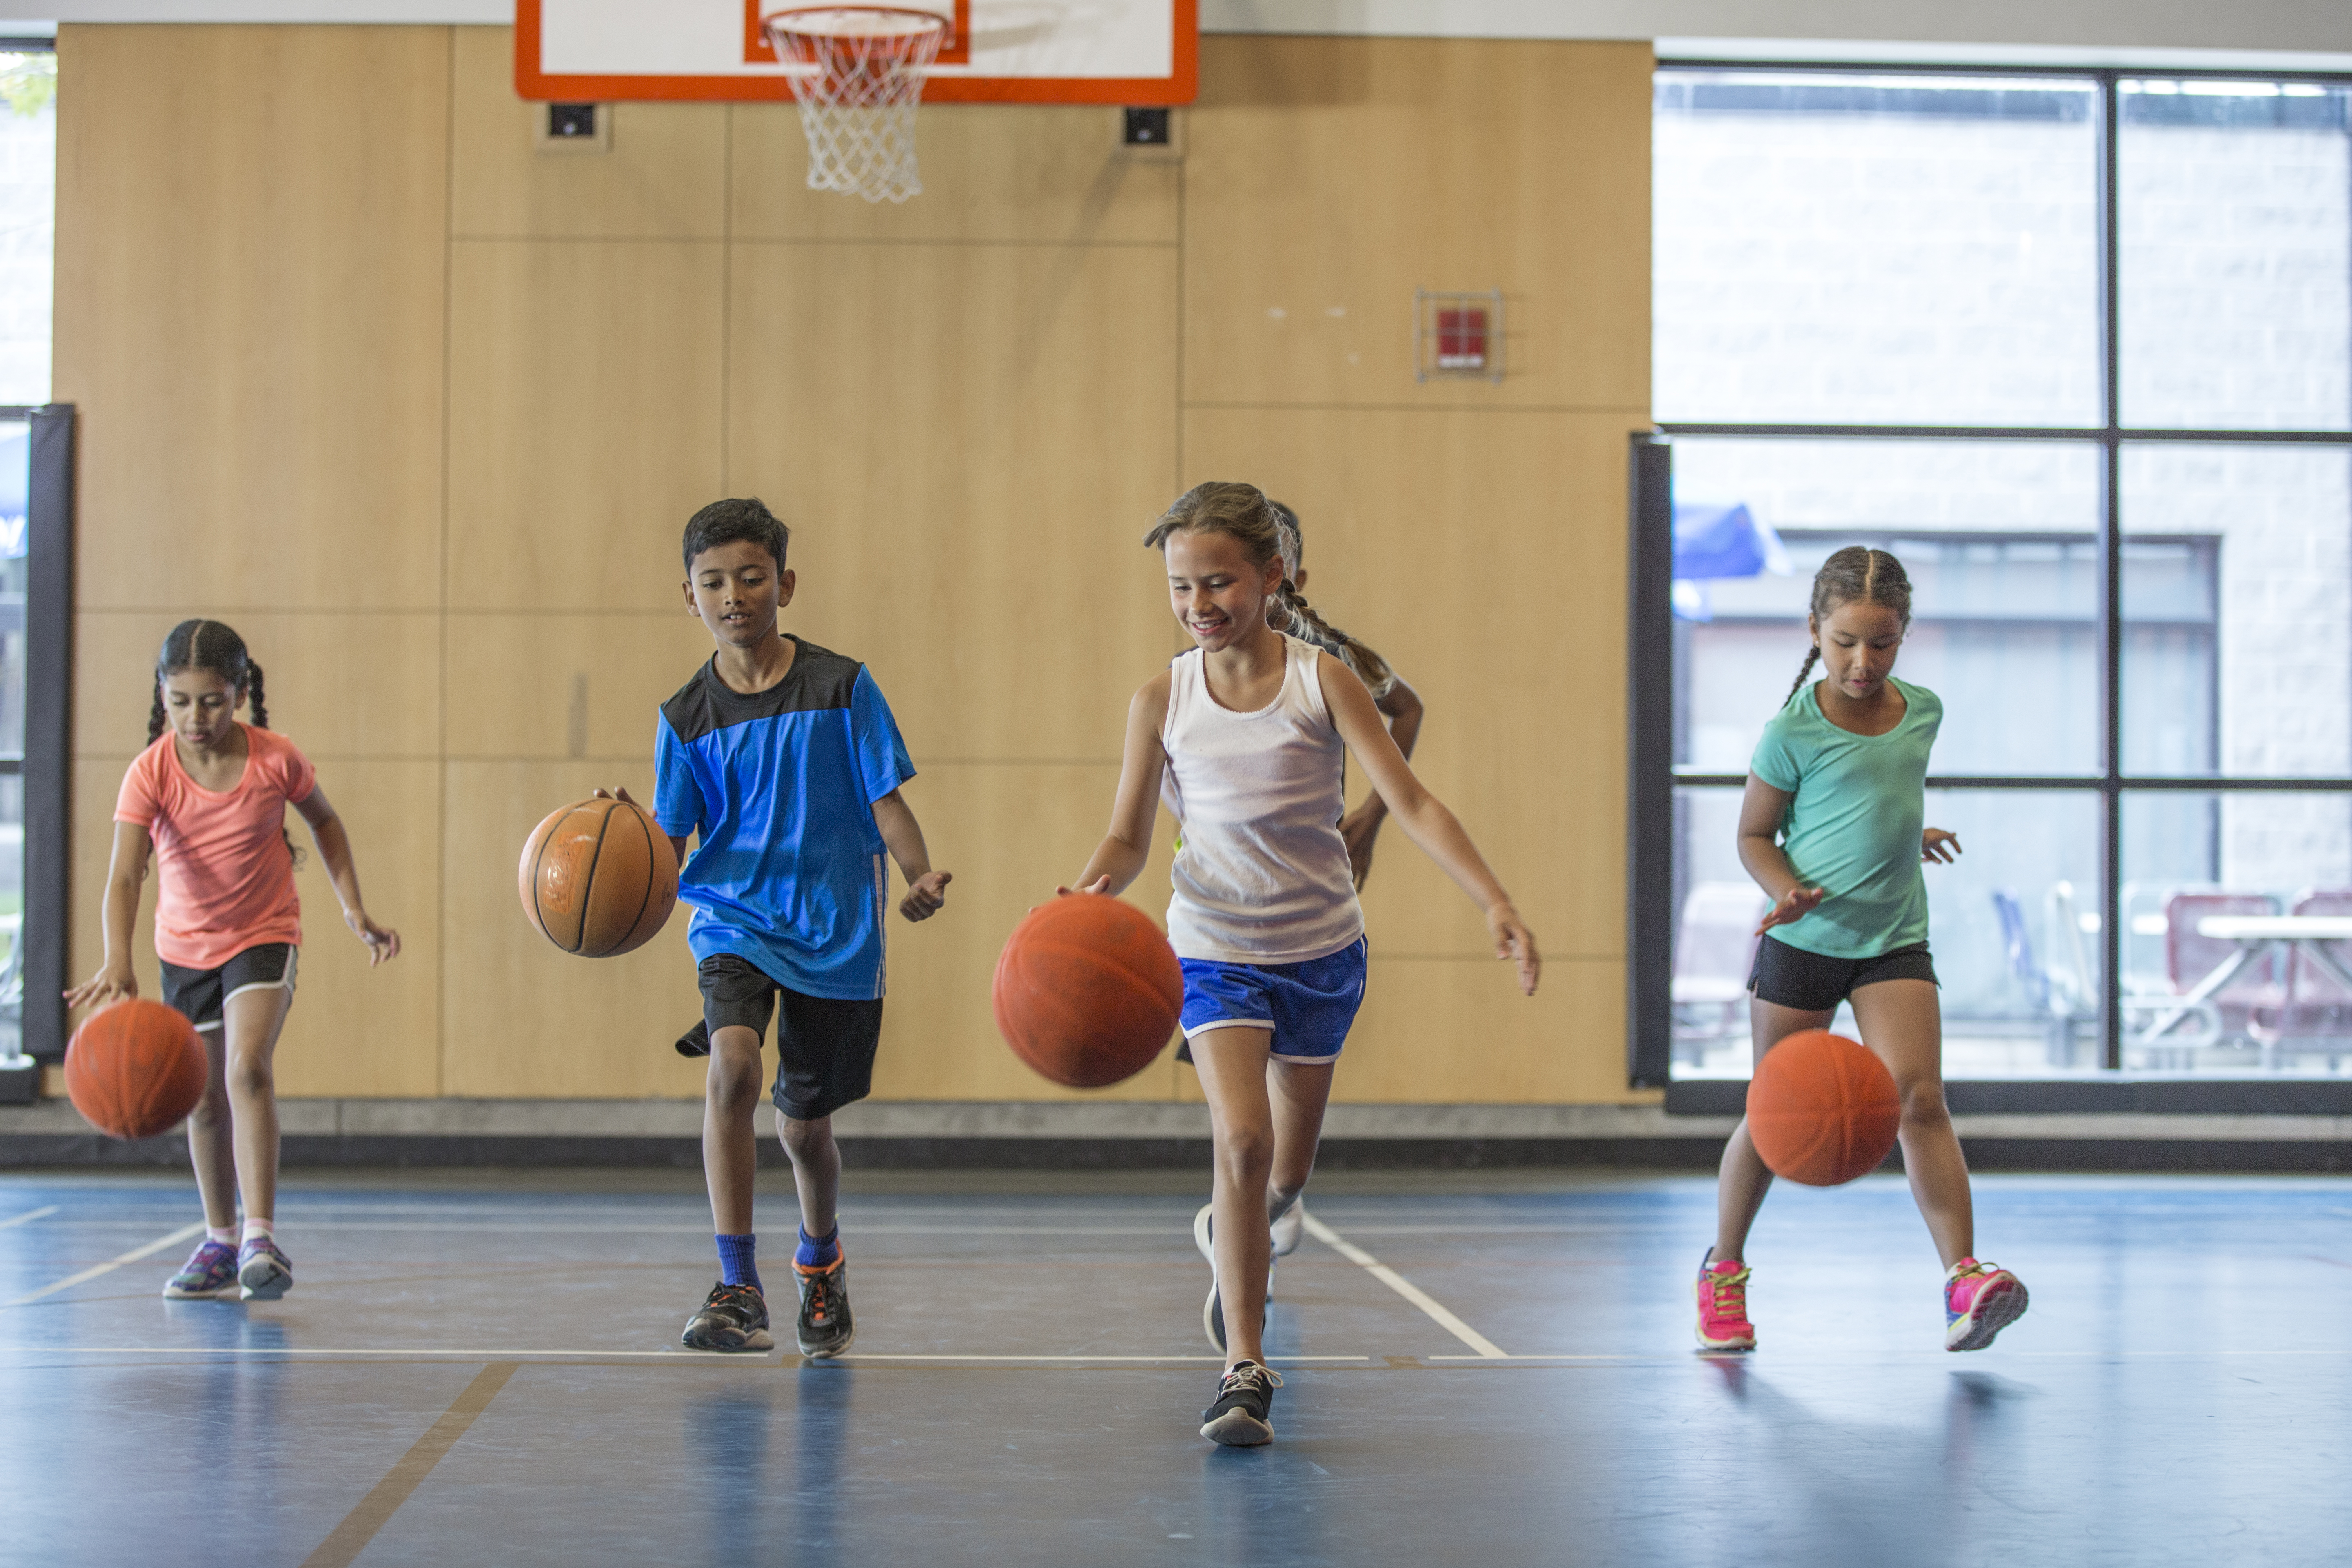 Four kids playing basketball in a gym.